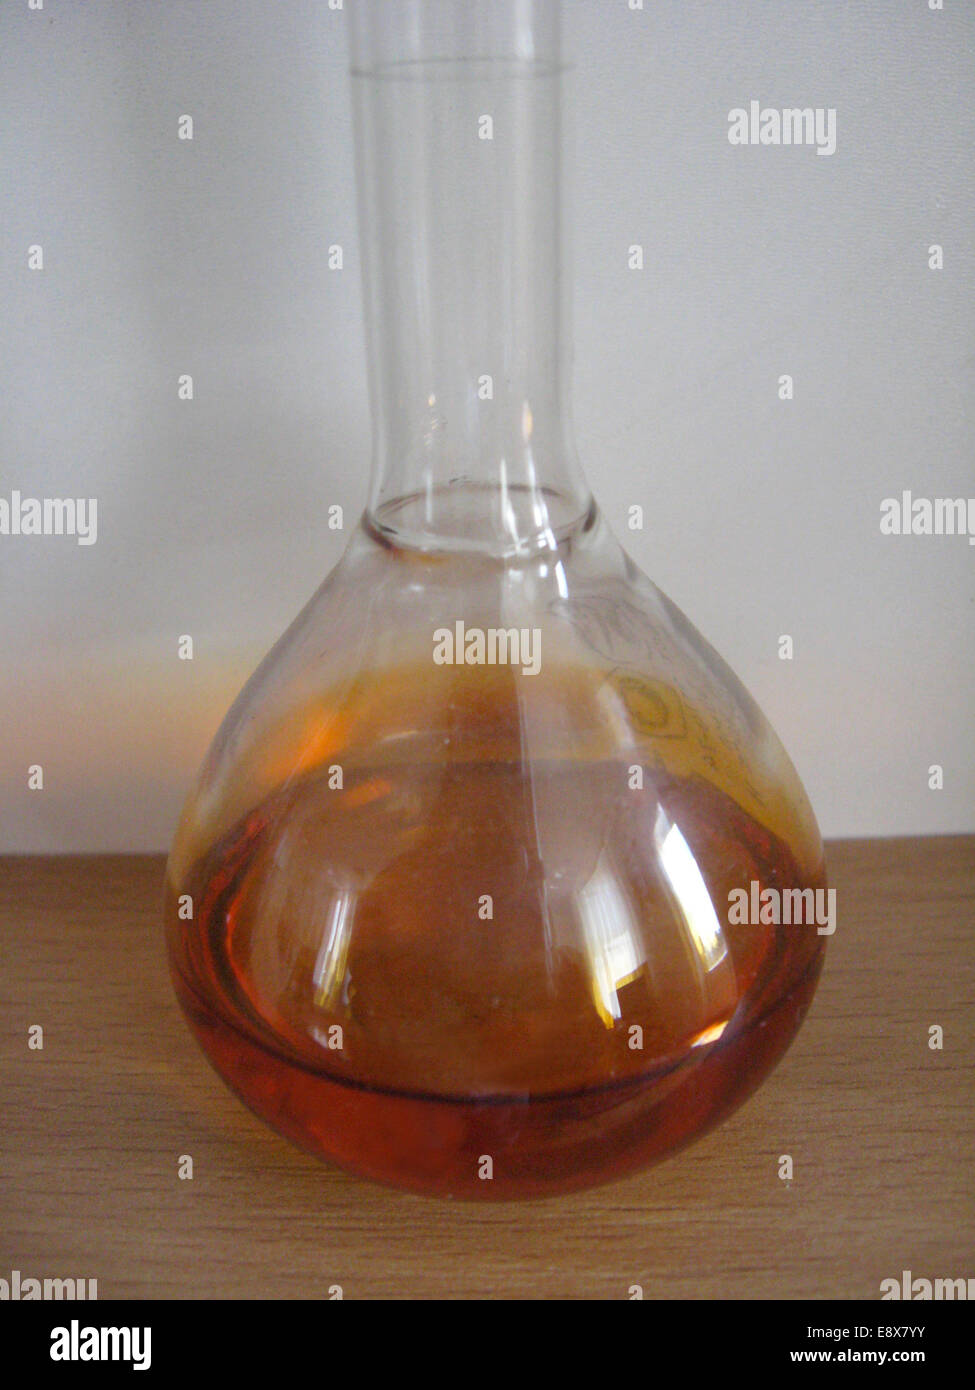 image of sample of oil in a flask Stock Photo